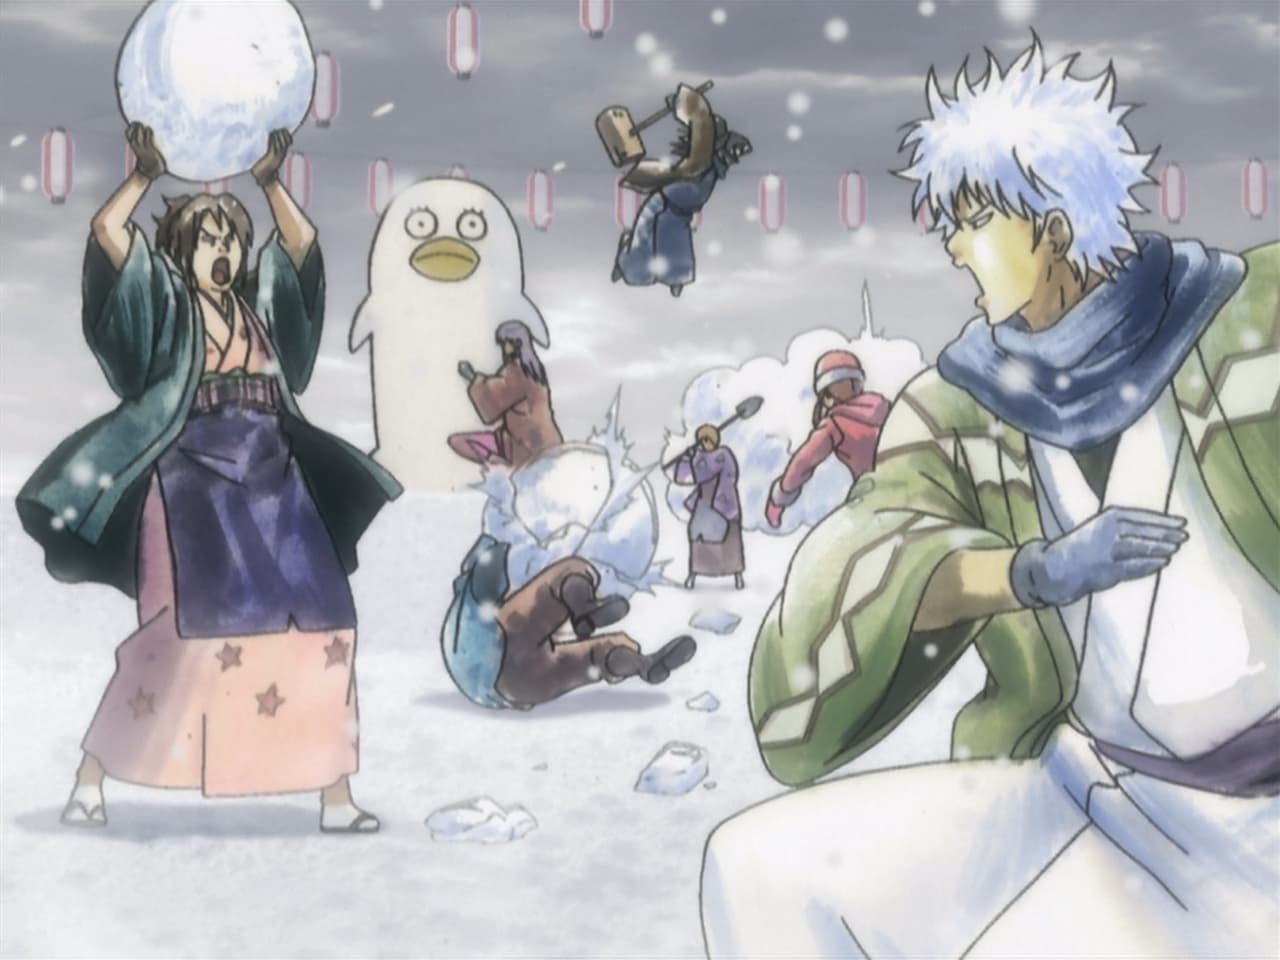 Gintama - Season 1 Episode 38 : Only Children Play in the Snow / Eating Ice Cream In Winter Is Awesome